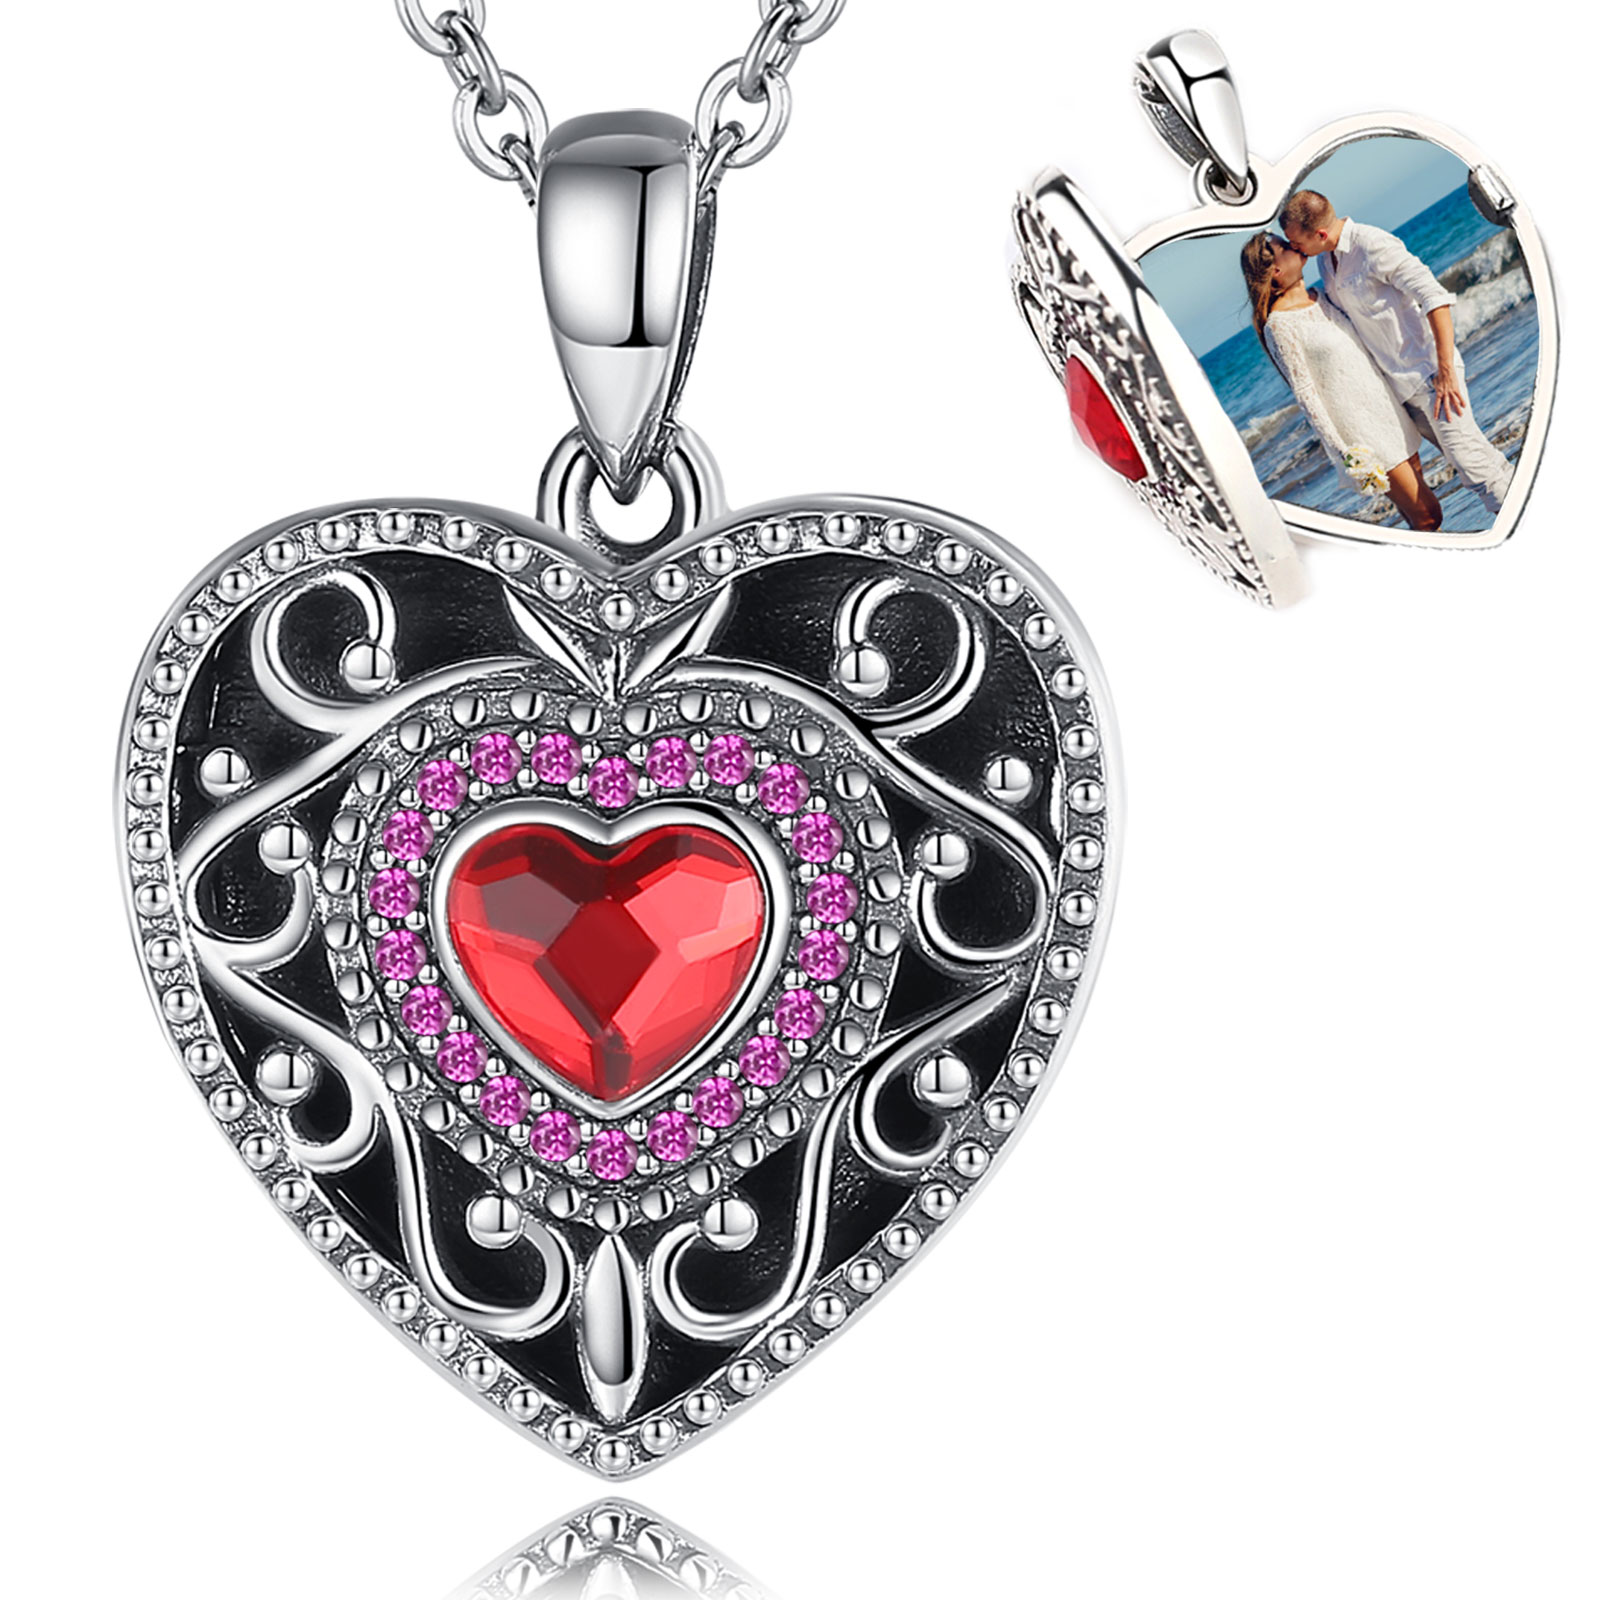 Merryshine Jewelry S925 Sterling Silver Heart Shaped Photo Locket Necklace with Red Cubic Zirconia